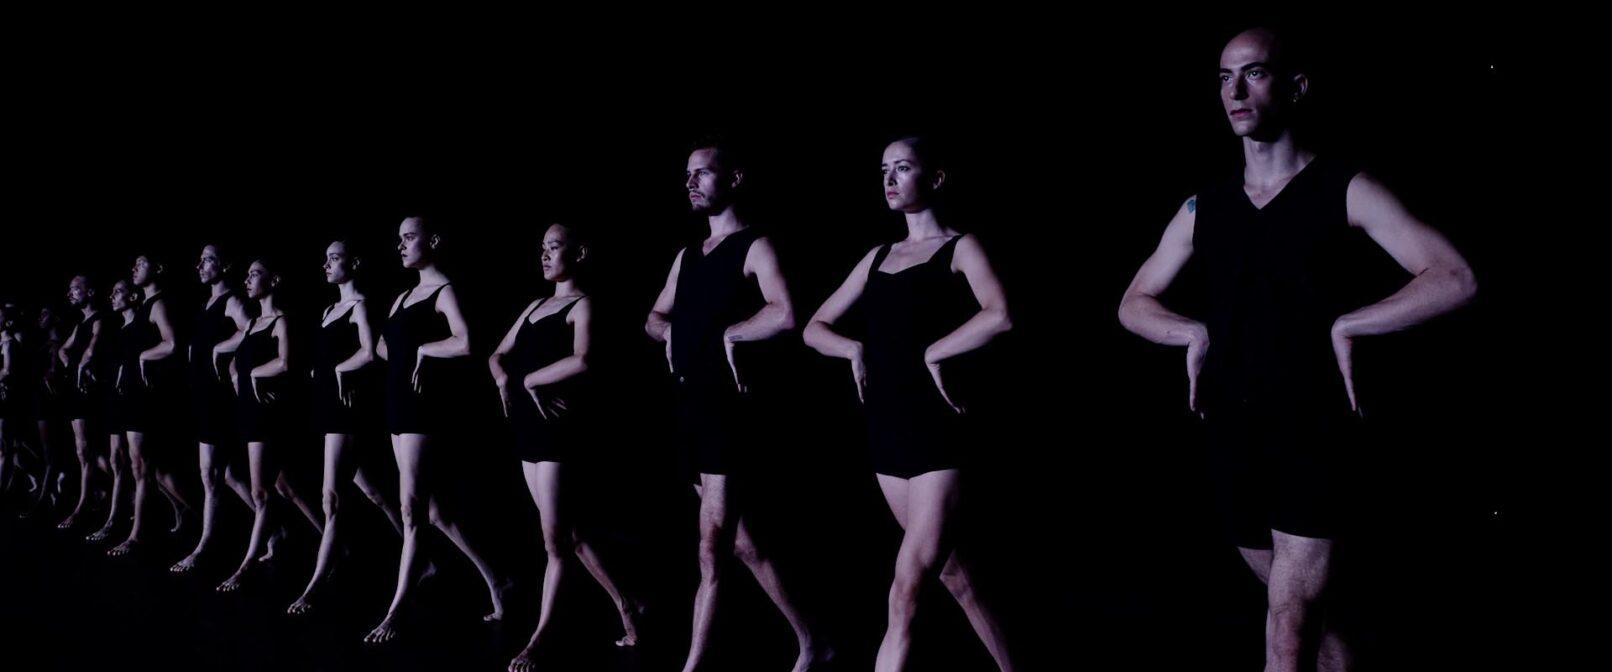 Batsheva Dance Company. Eleven fair skinned dancers in tight black sleeveless tops and shorts stand side by side in a line with their hands on their hips. They are facing slightly to the left of the frame. The dancer on the far right is closest to the camera with the others receding back into the frame to the left.